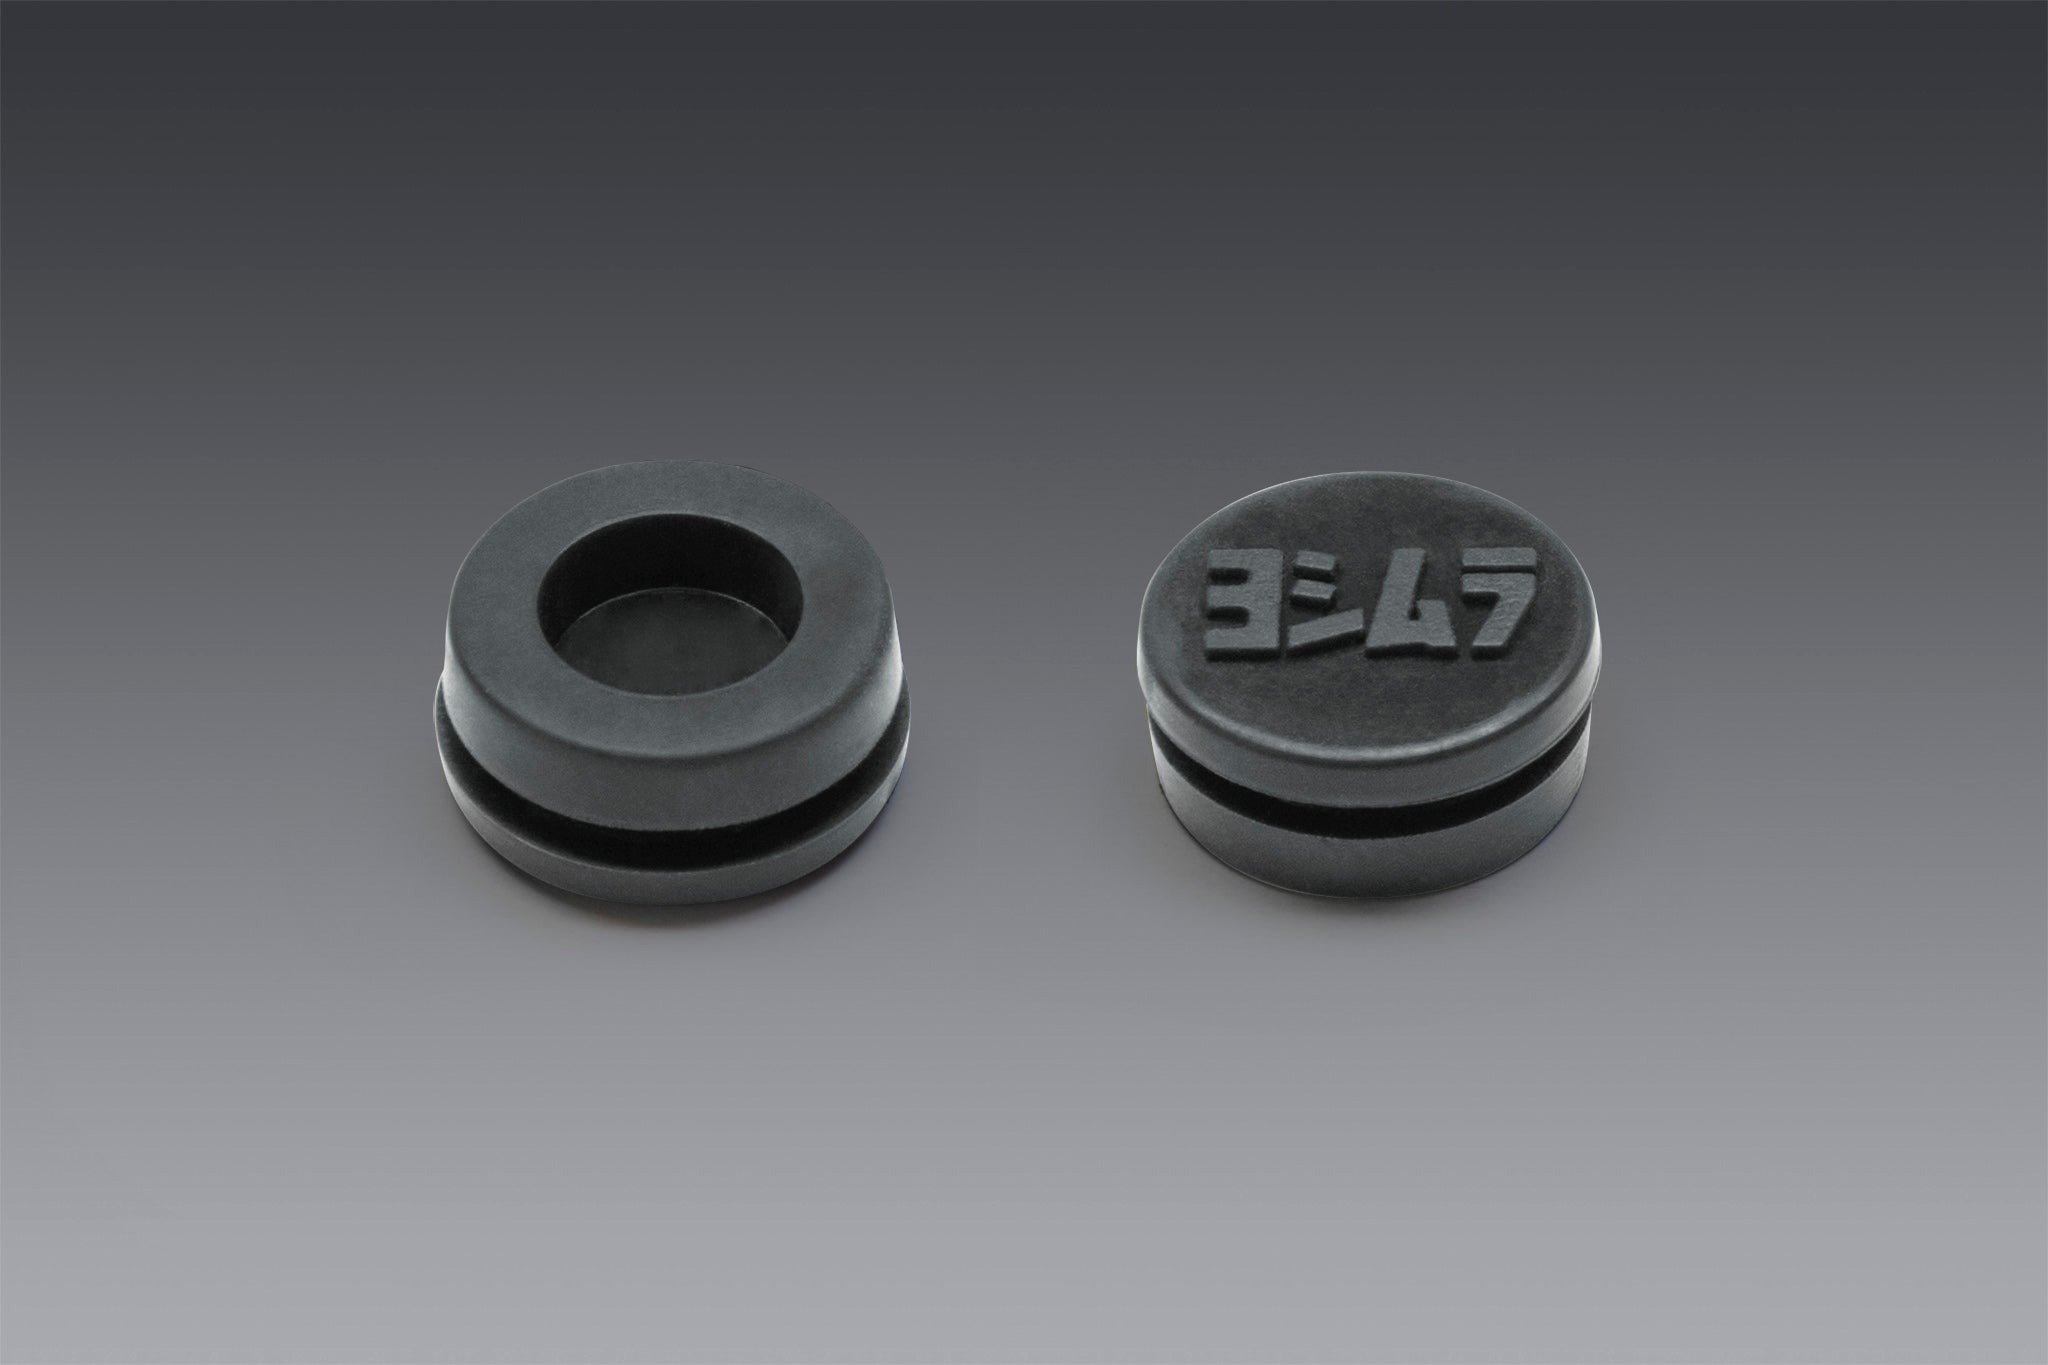 Cable Wire End Protection Caps at Rs 10/piece